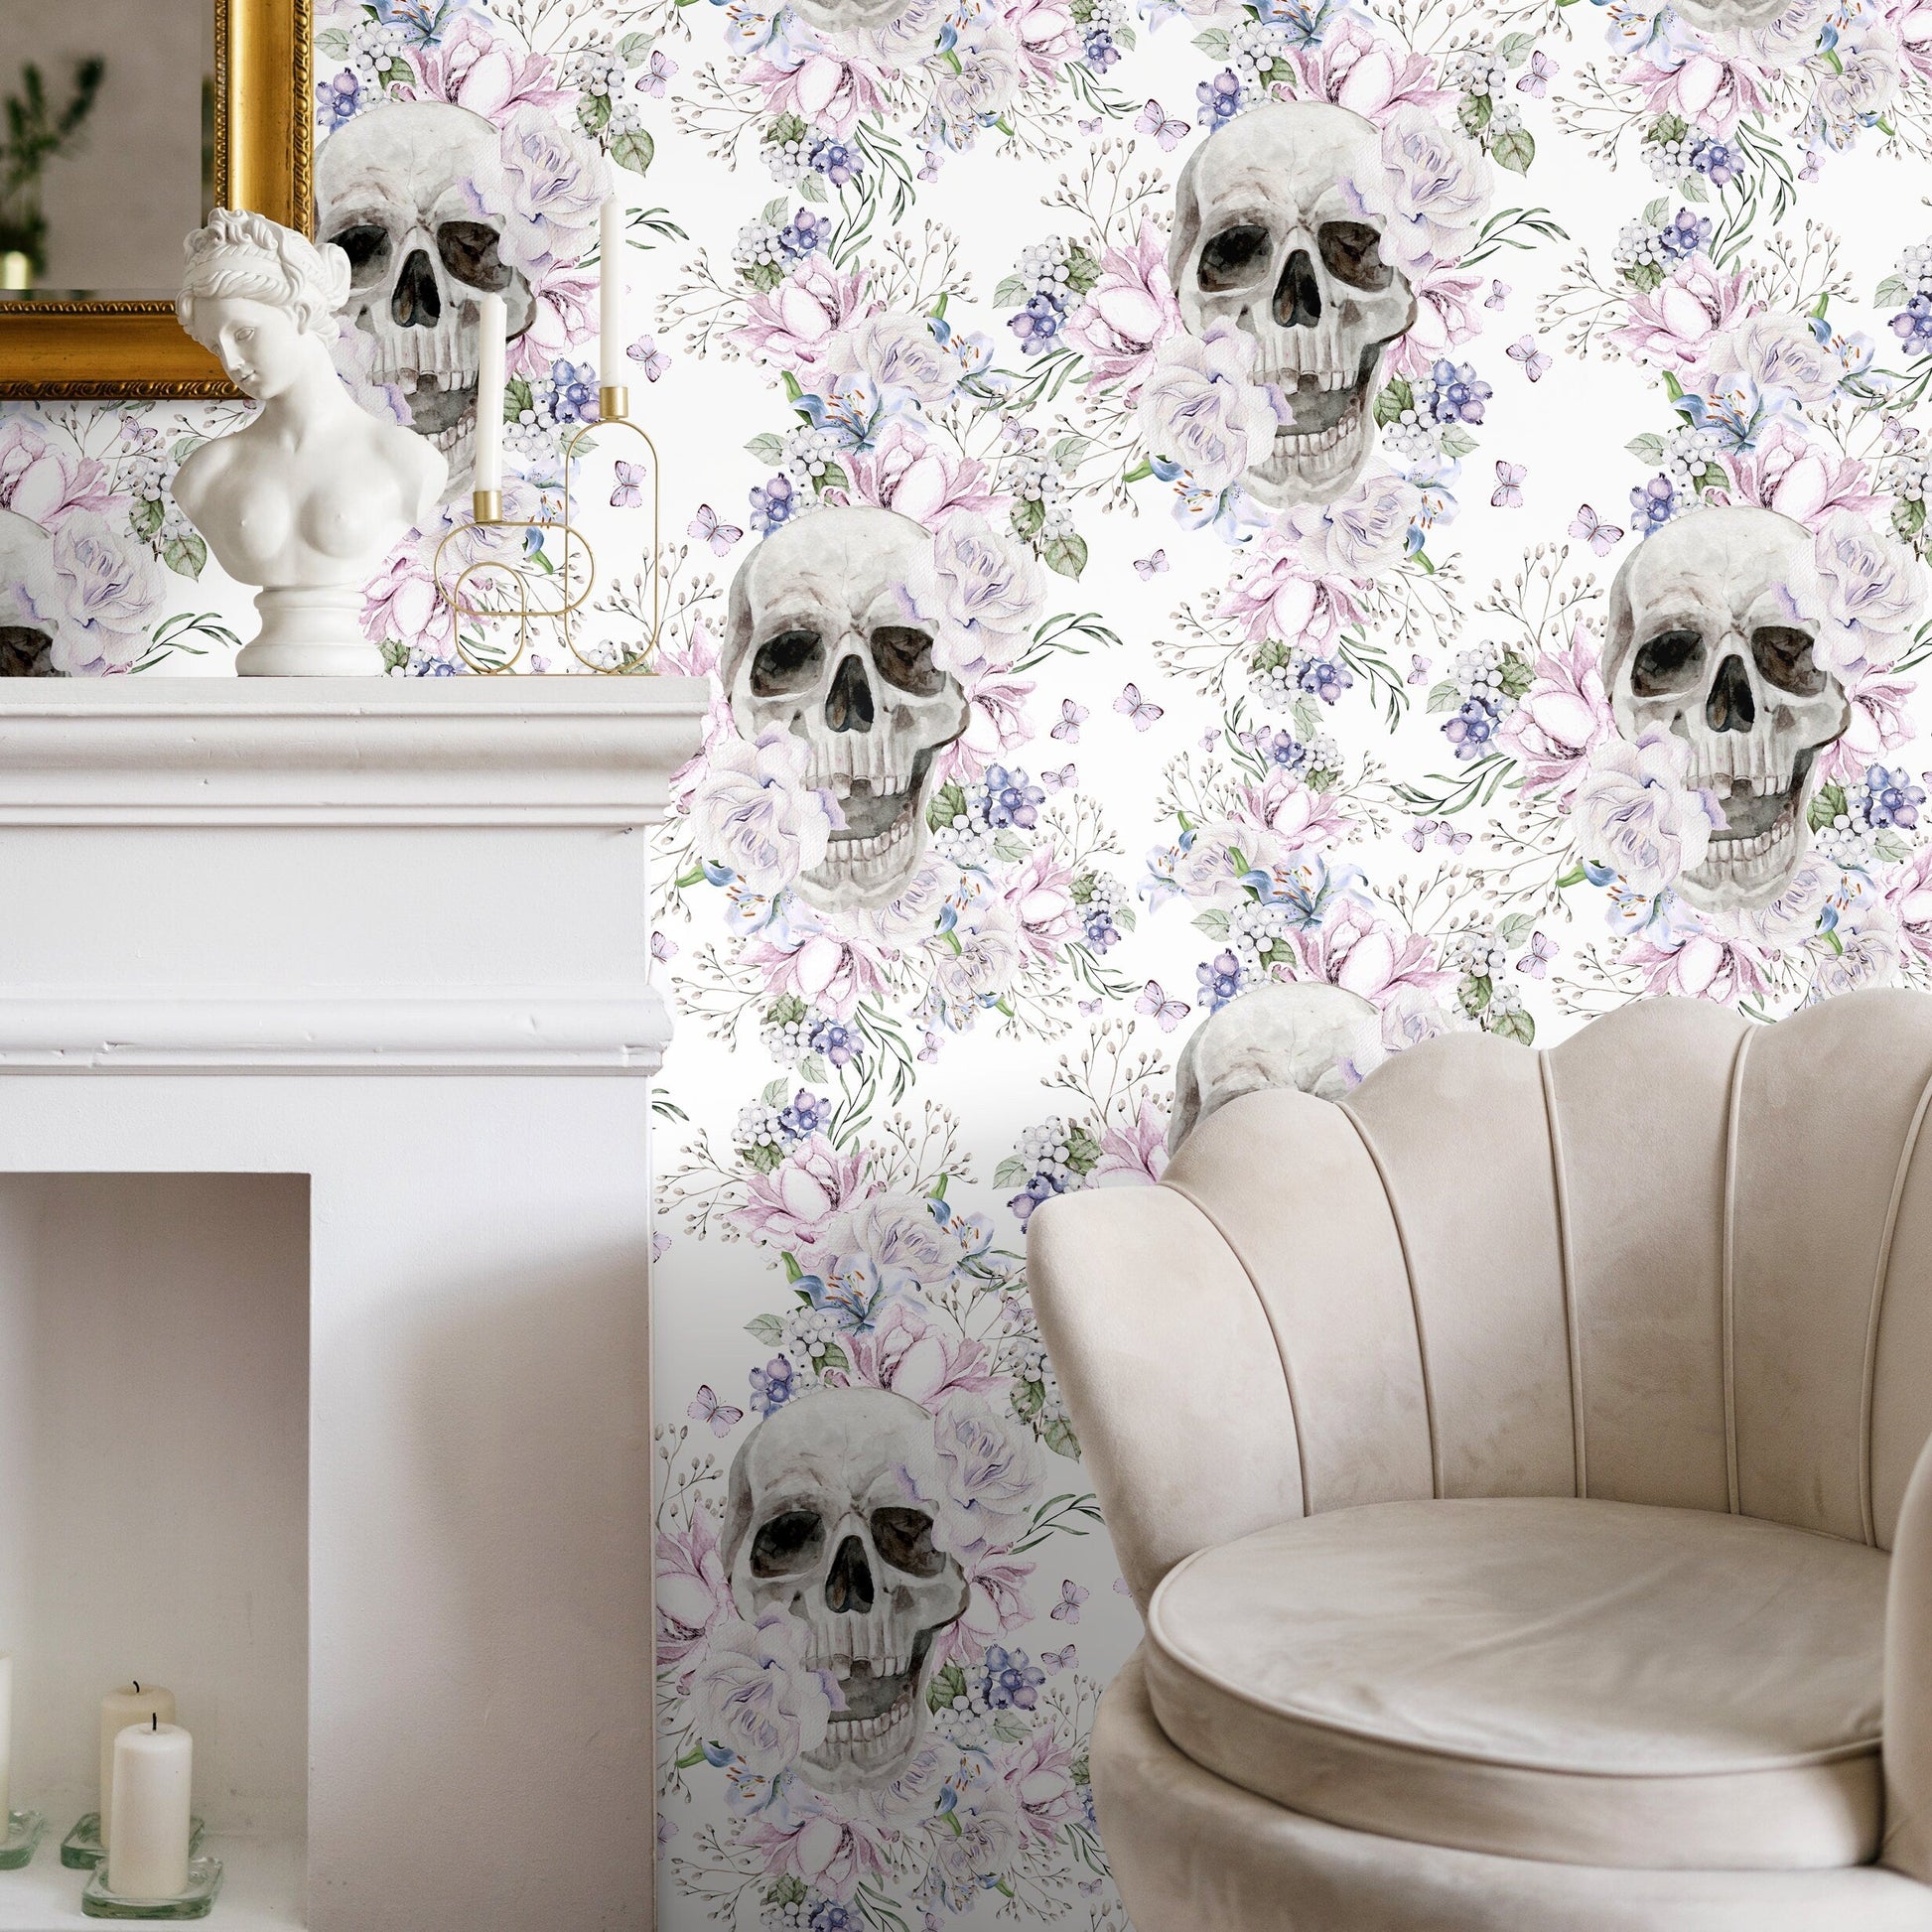 Vintage Floral Wallpaper Light Floral Skull Wallpaper Peel and Stick and Traditional Wallpaper - D930